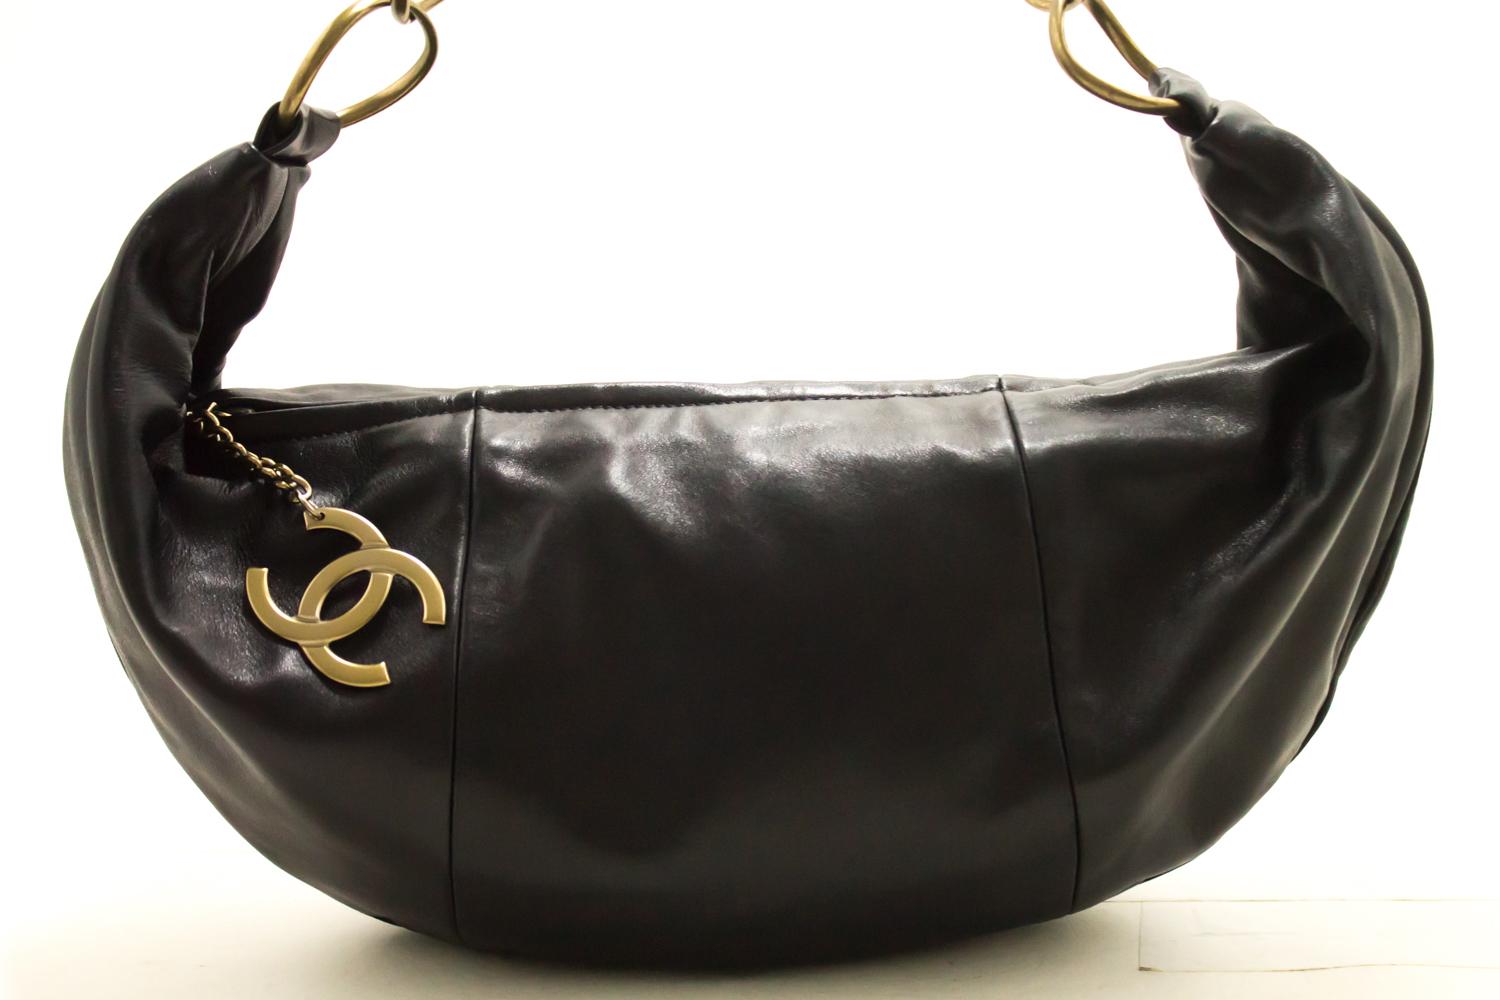 An authentic Chanel Half Moon made of black Lambskin Chain Shoulder Bag Black Leather Zipper. The color is Black. The outside material is Leather. The pattern is Solid.
Conditions & Ratings
Outside material: Lambskin
Color: Black
Closure: